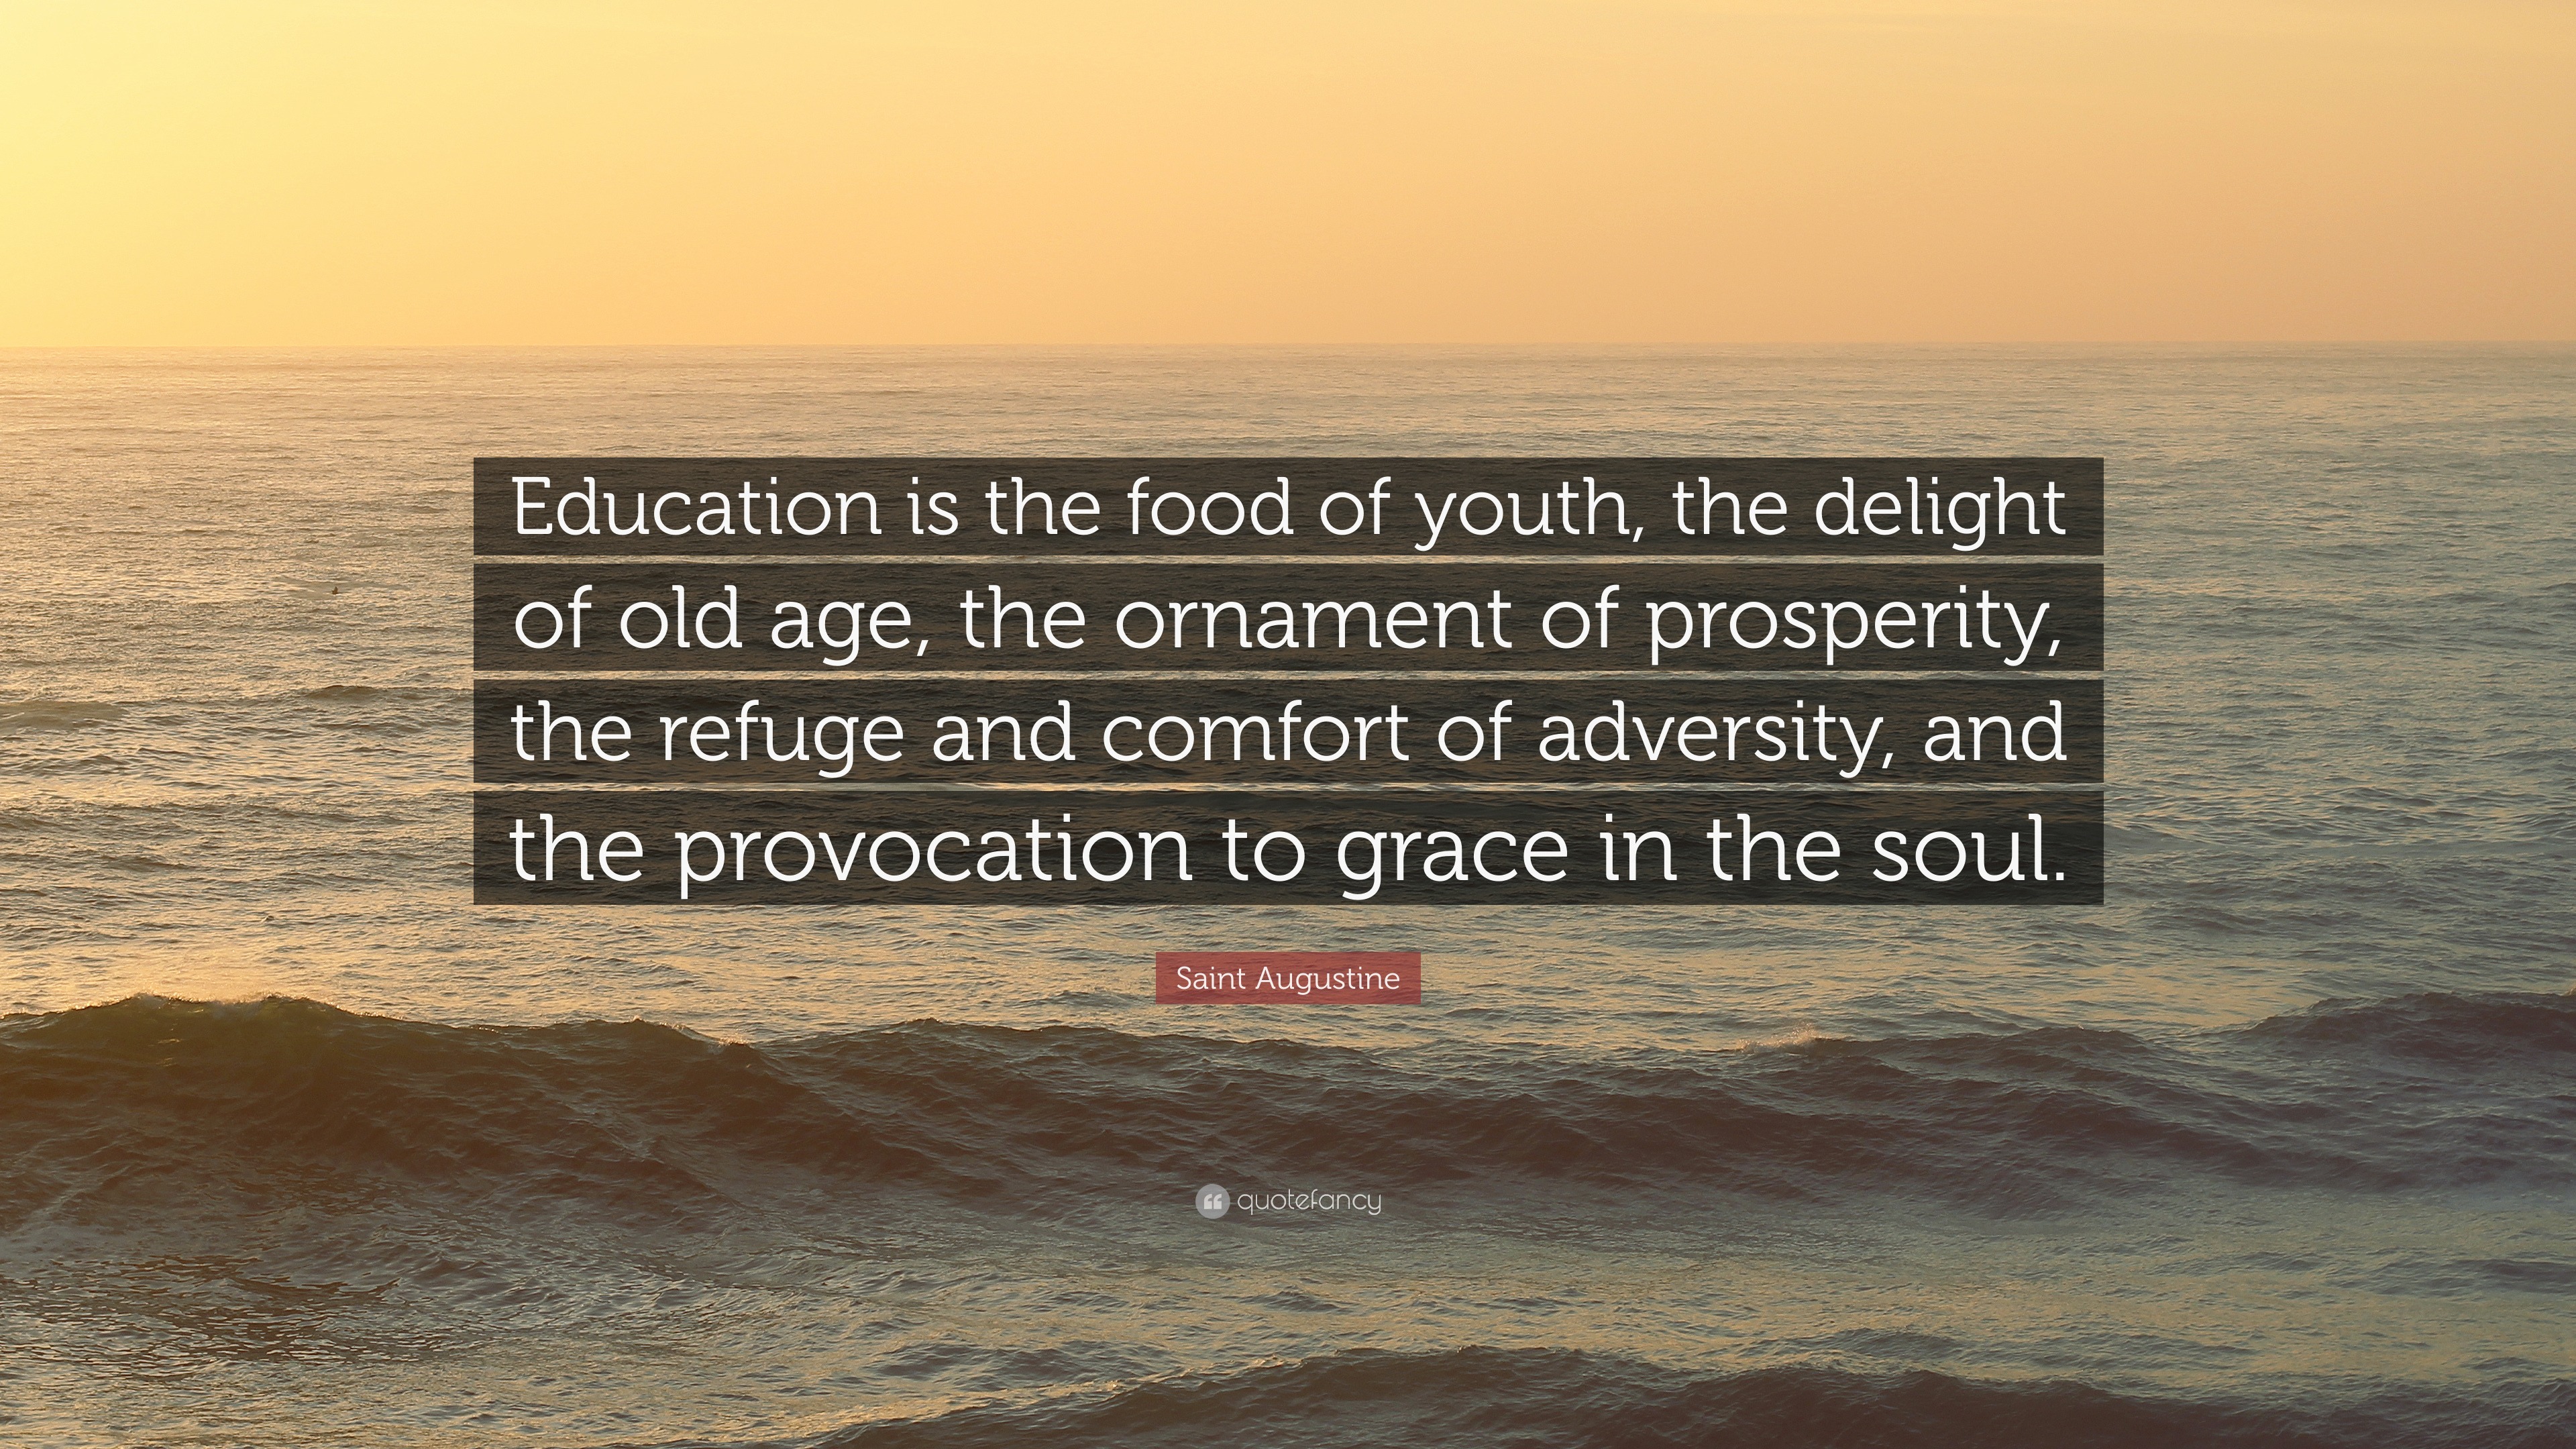 Saint Augustine Quote: “Education is the food of youth, the delight of